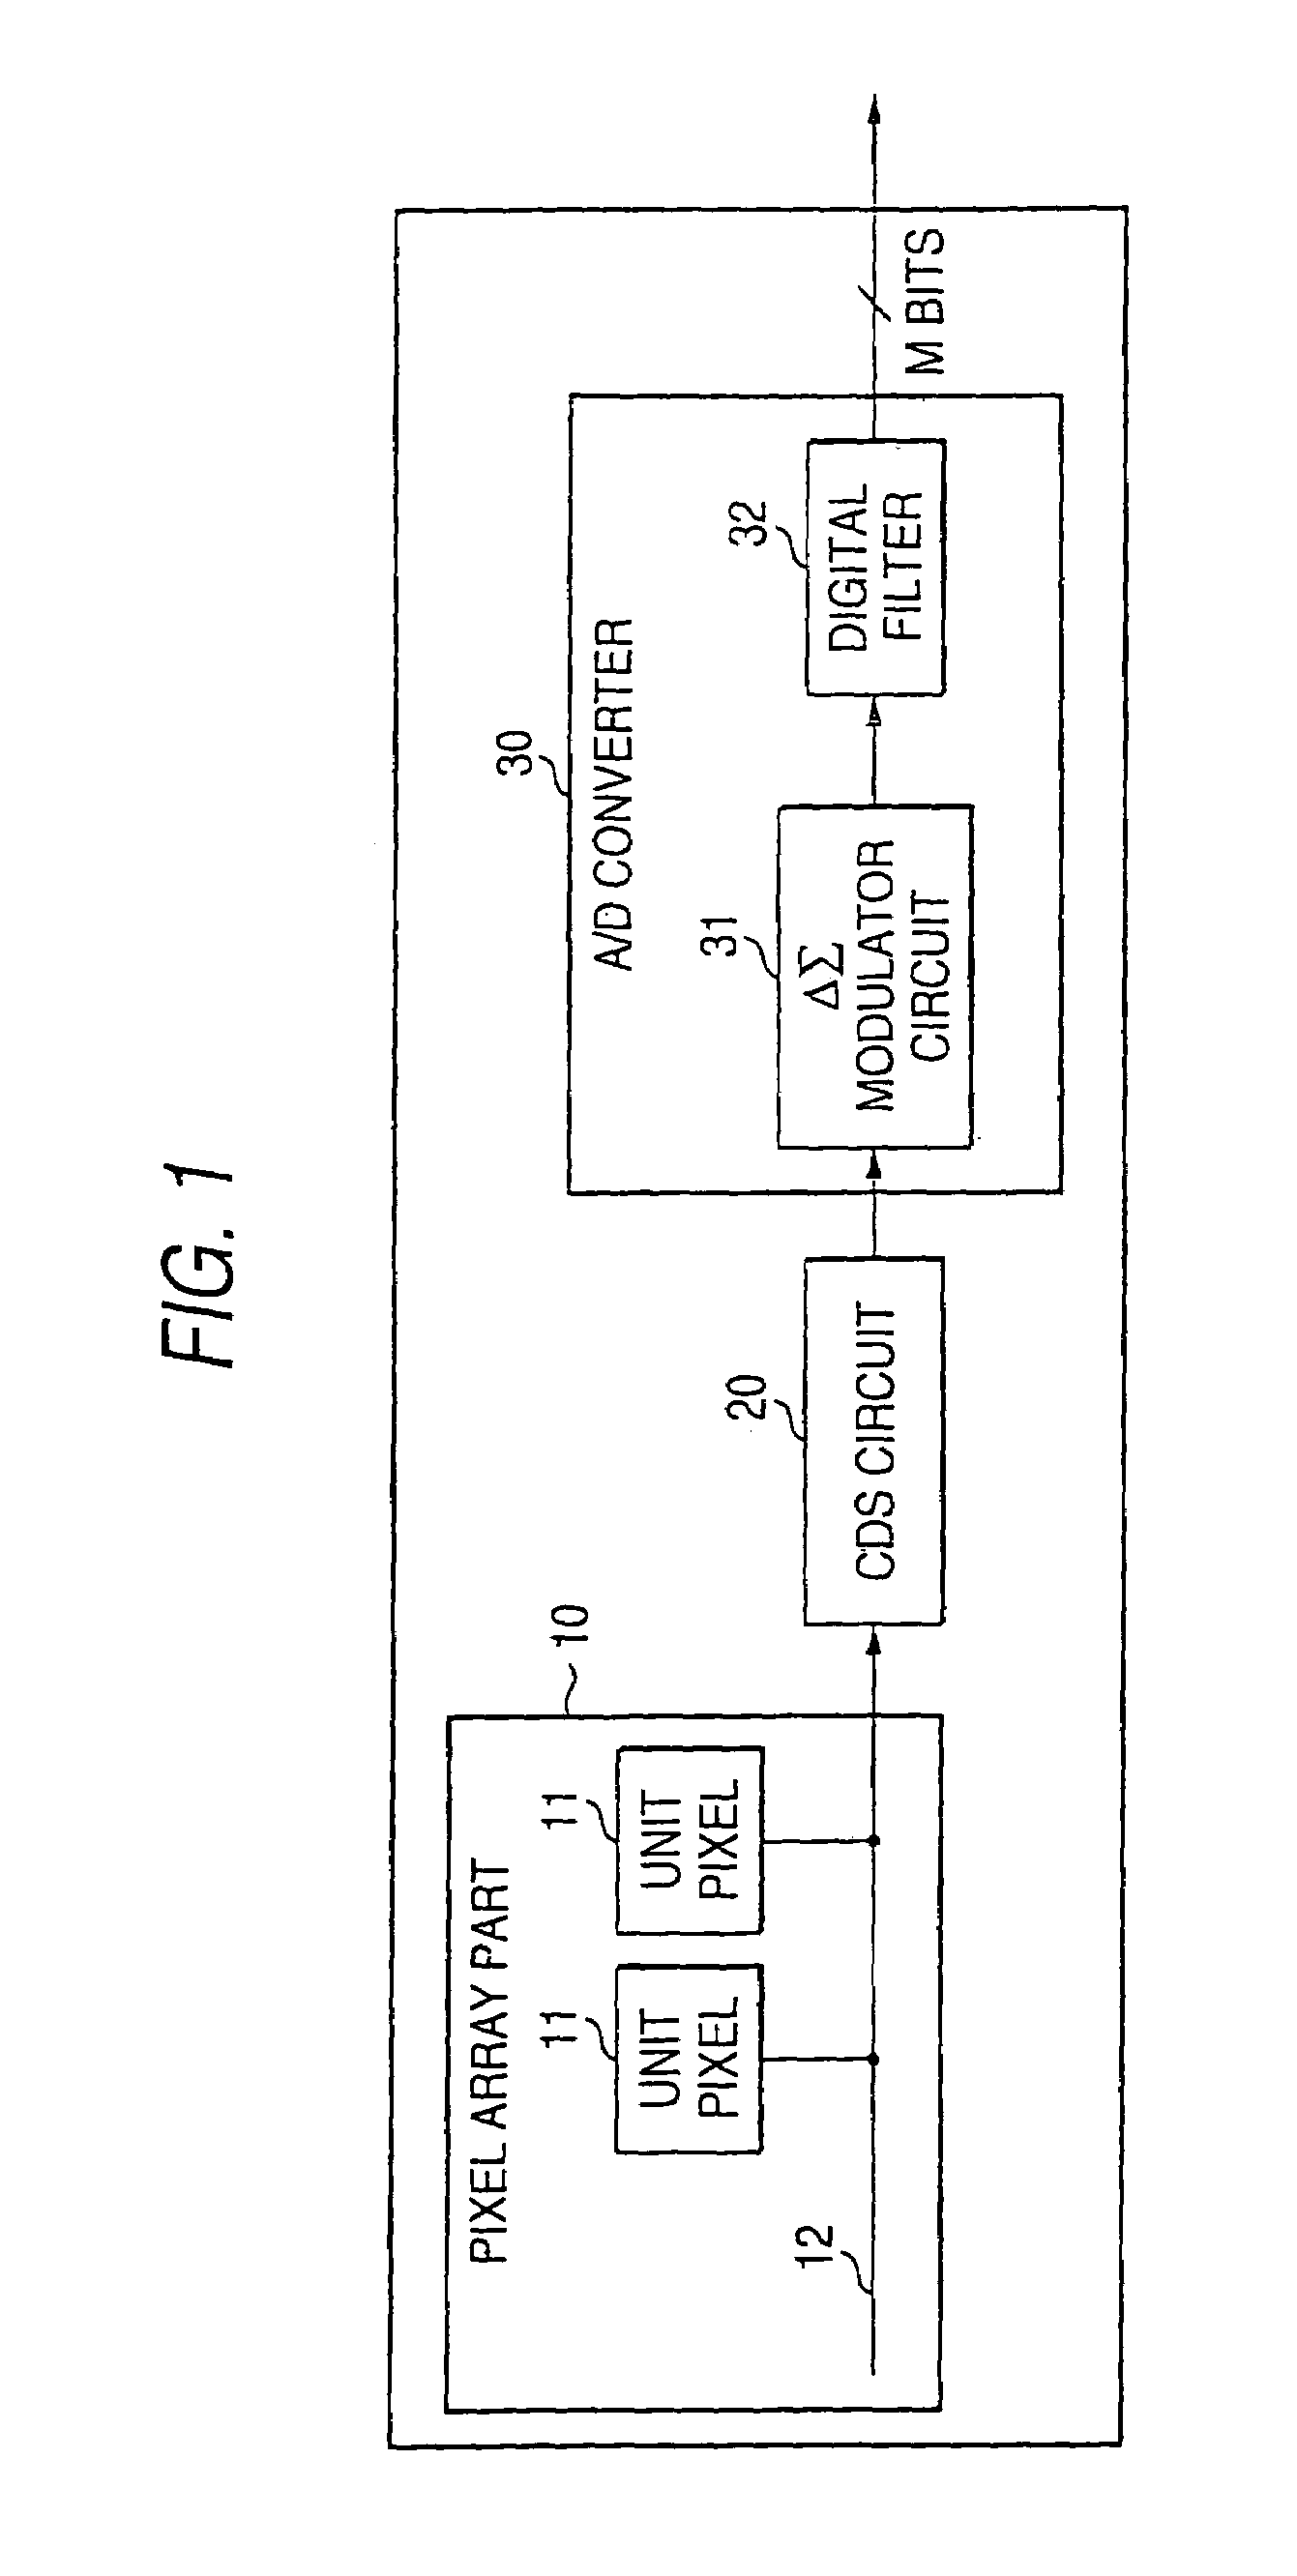 Solid-state image pickup device and signal processing method therefor